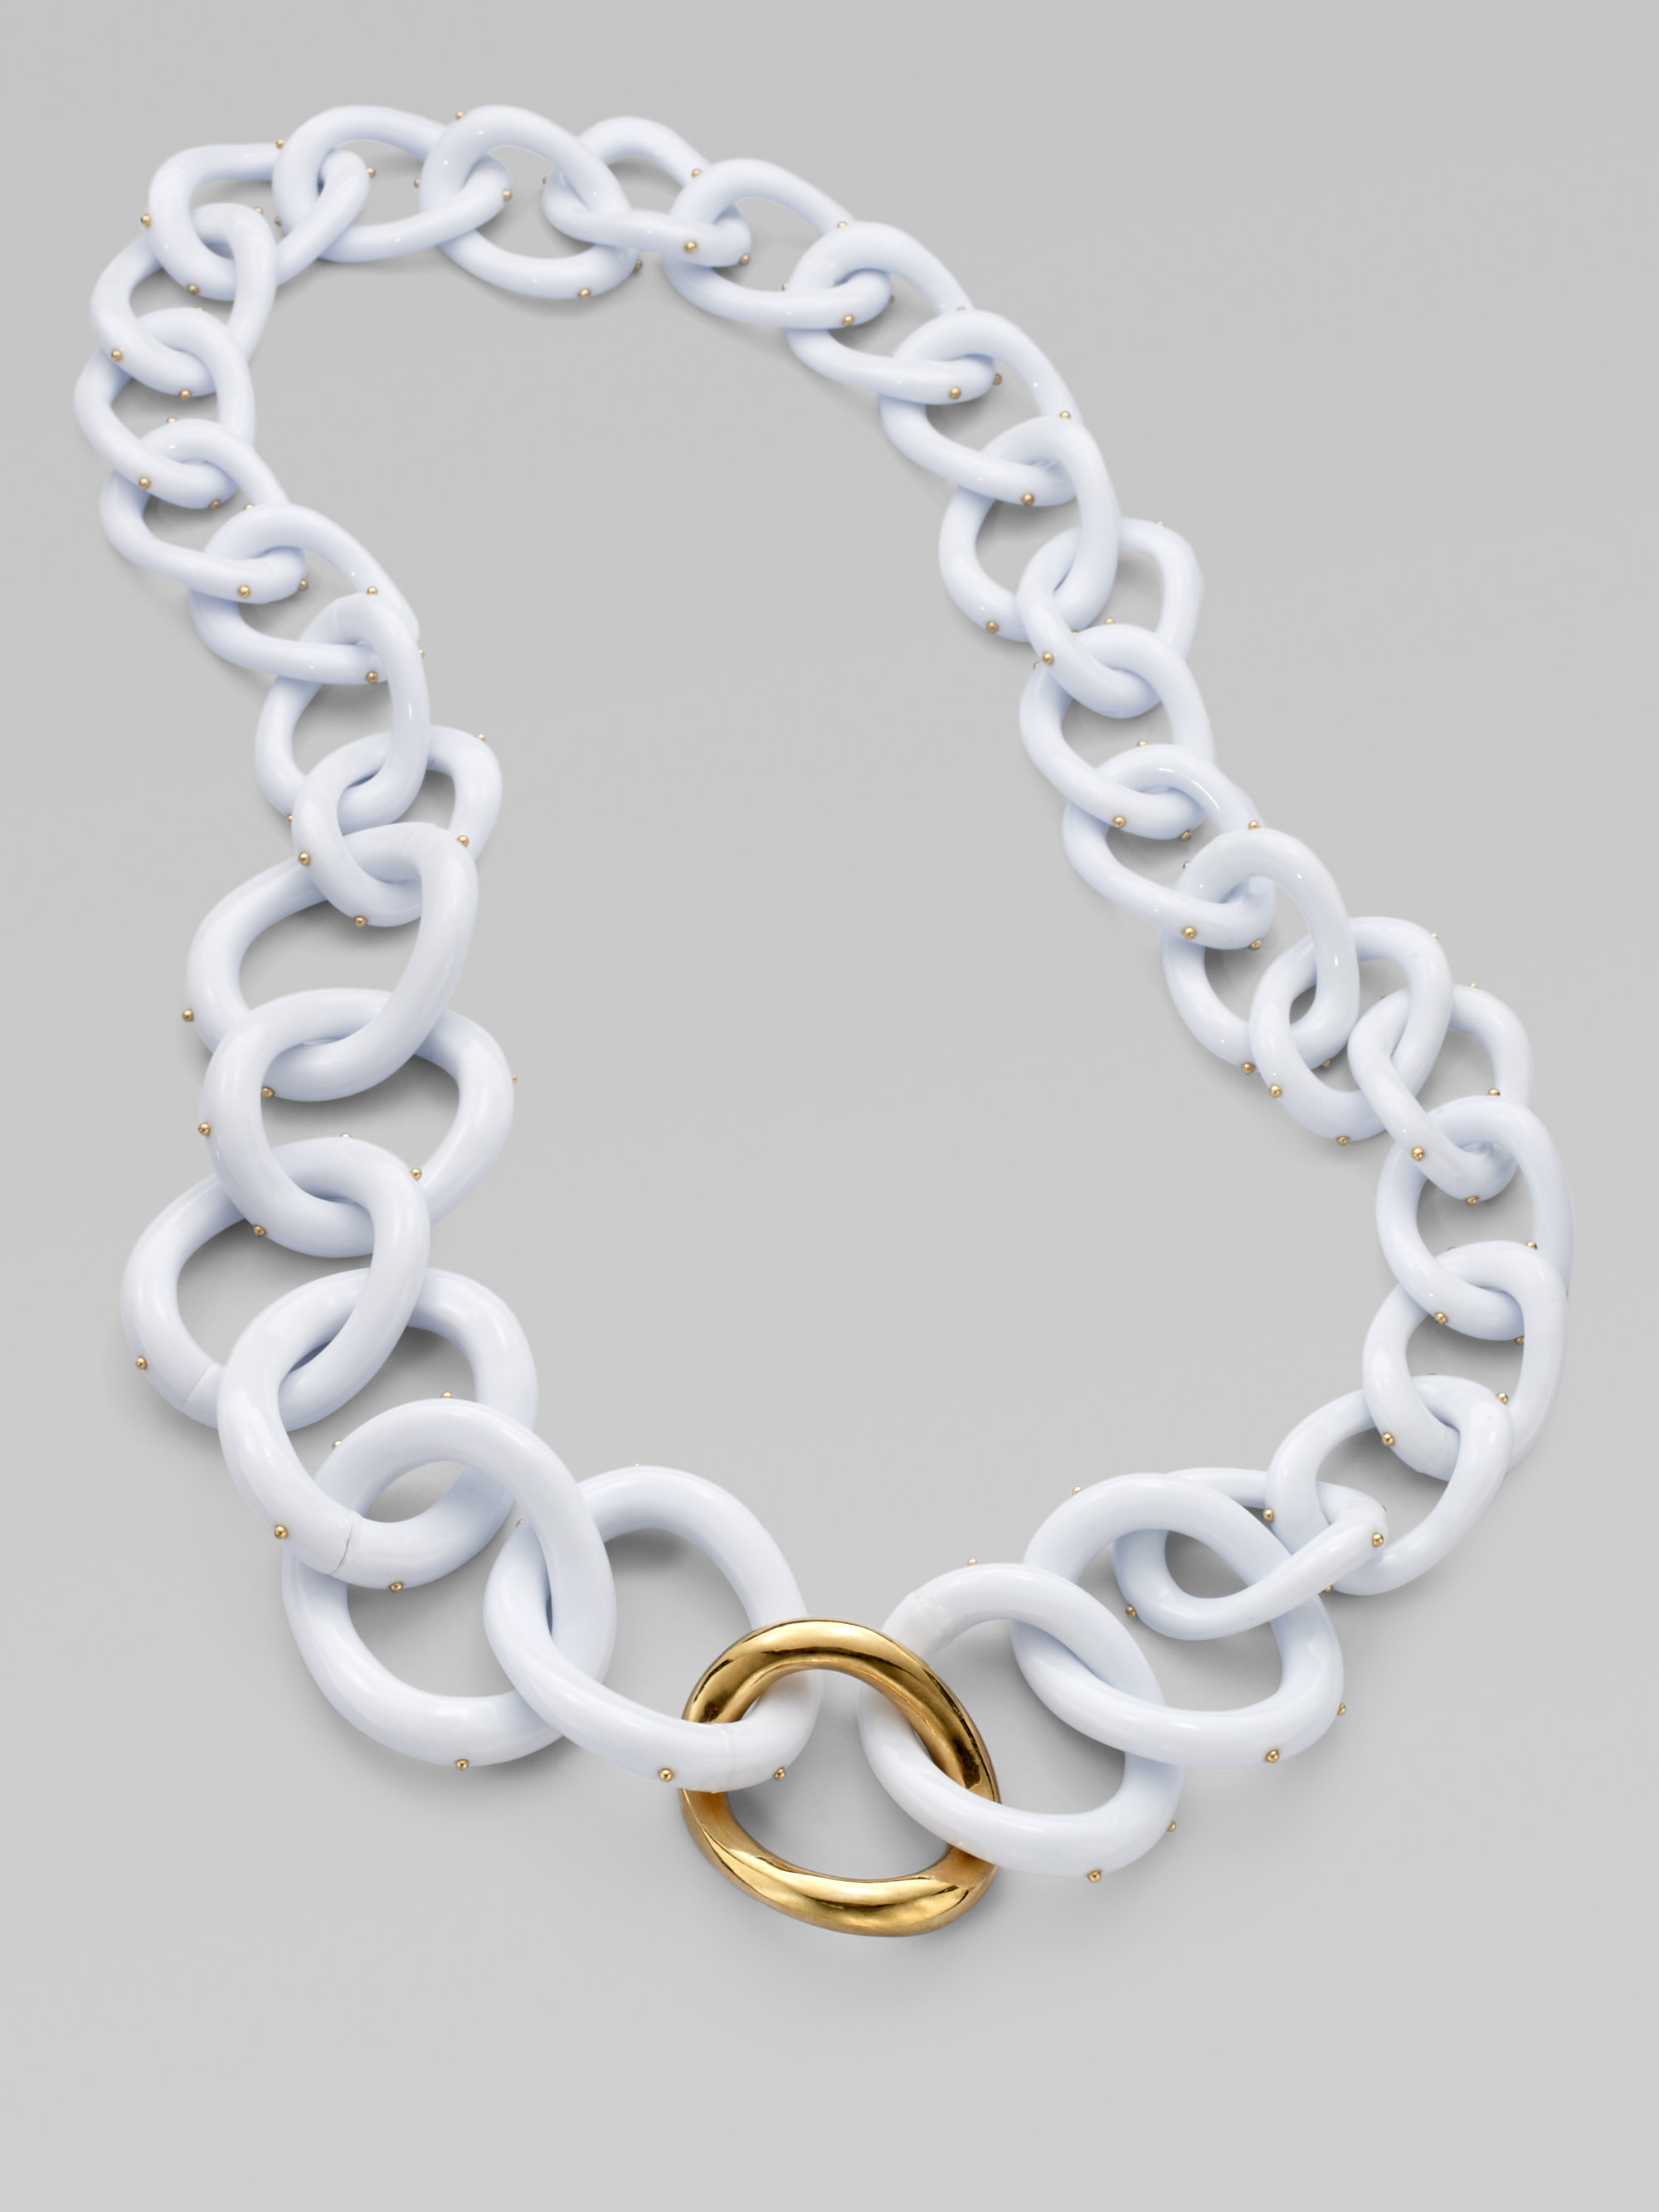 Kara Ross Chunky Resin Link Necklace in White | Lyst